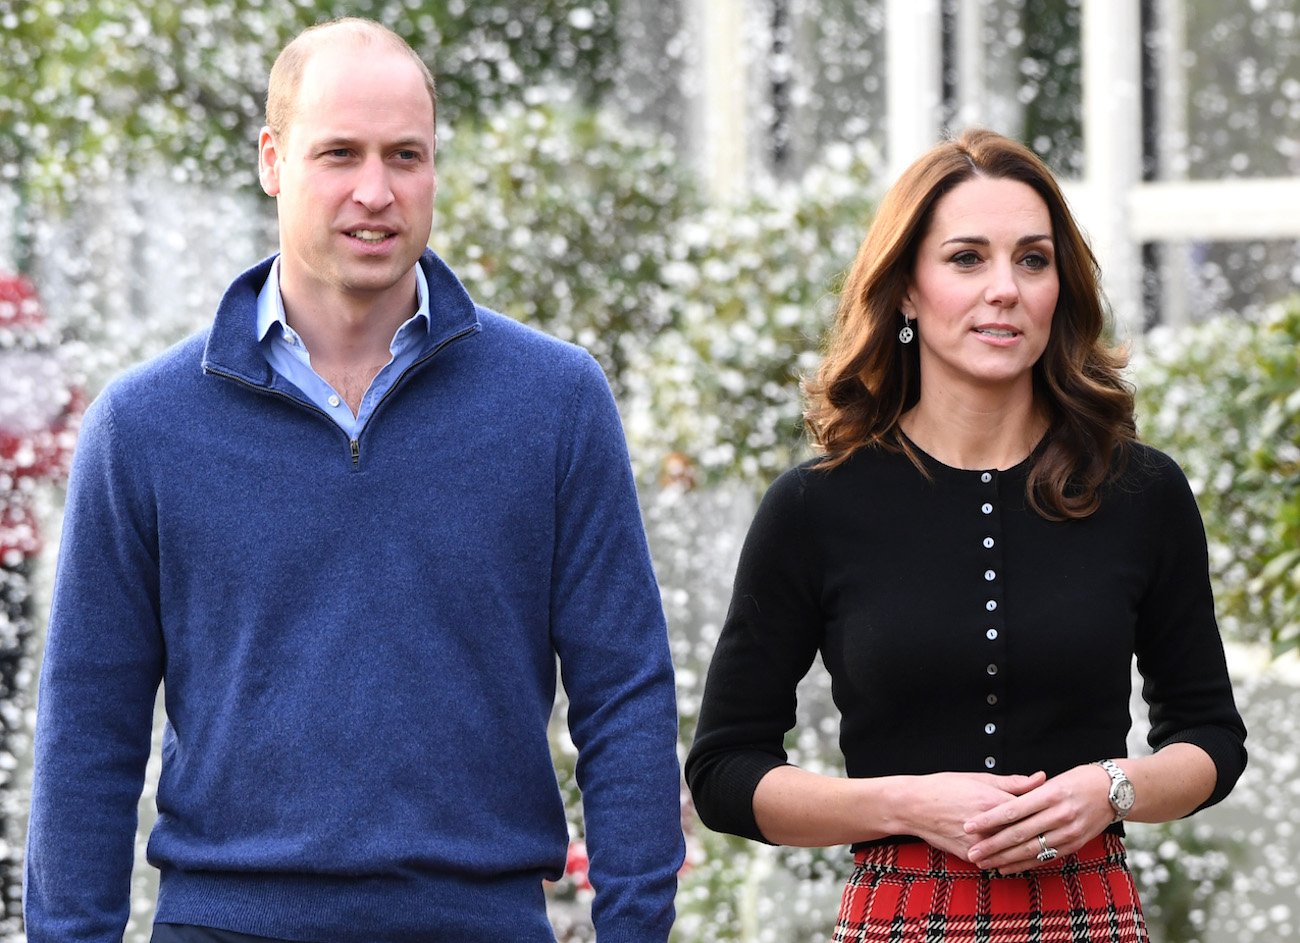 Prince William wears a blue sweater as he stands next to Kate Middleton who wears a black top and red skirt